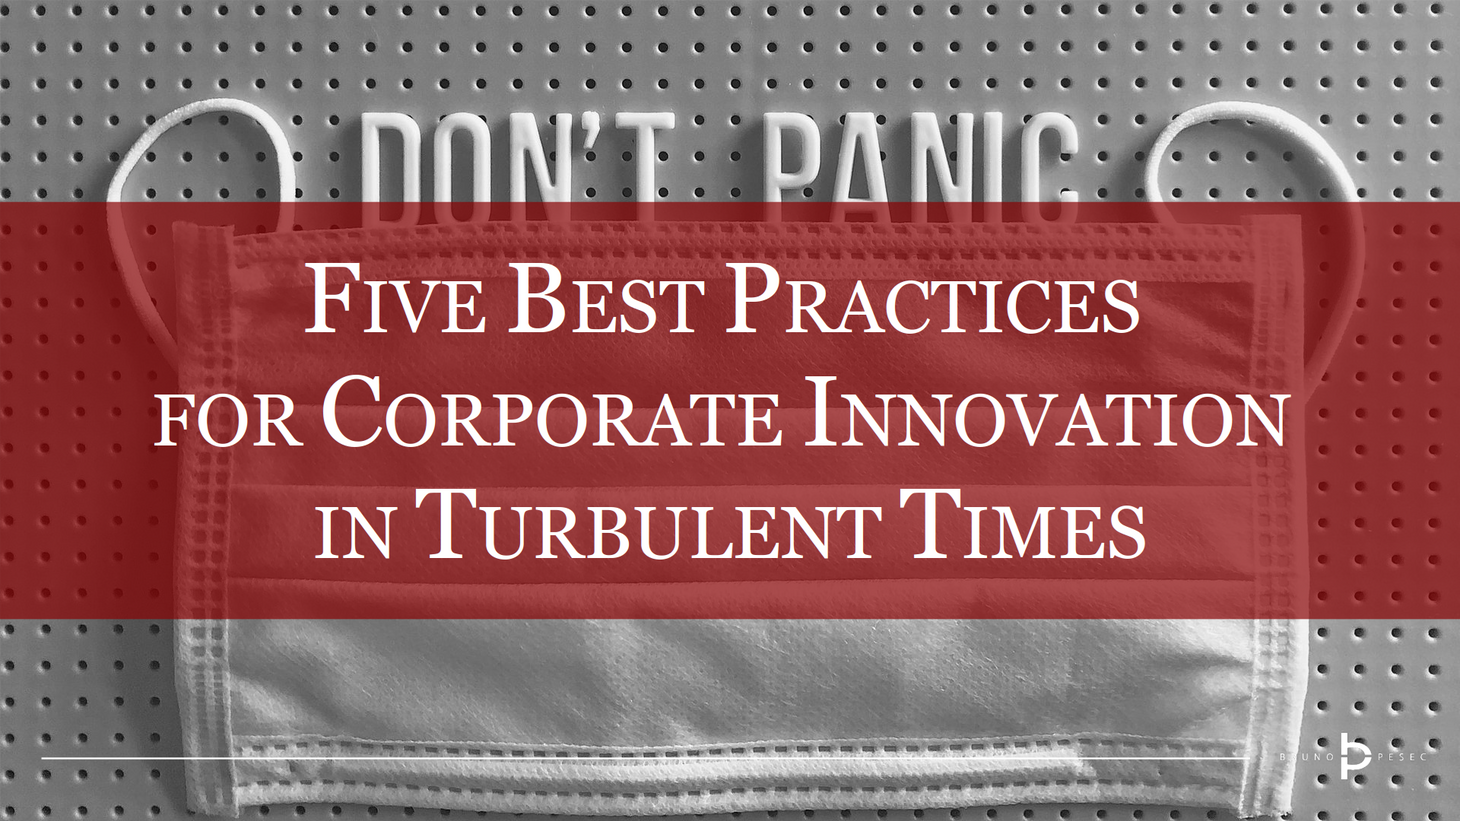 Five best practices for corporate innovation in turbulent times